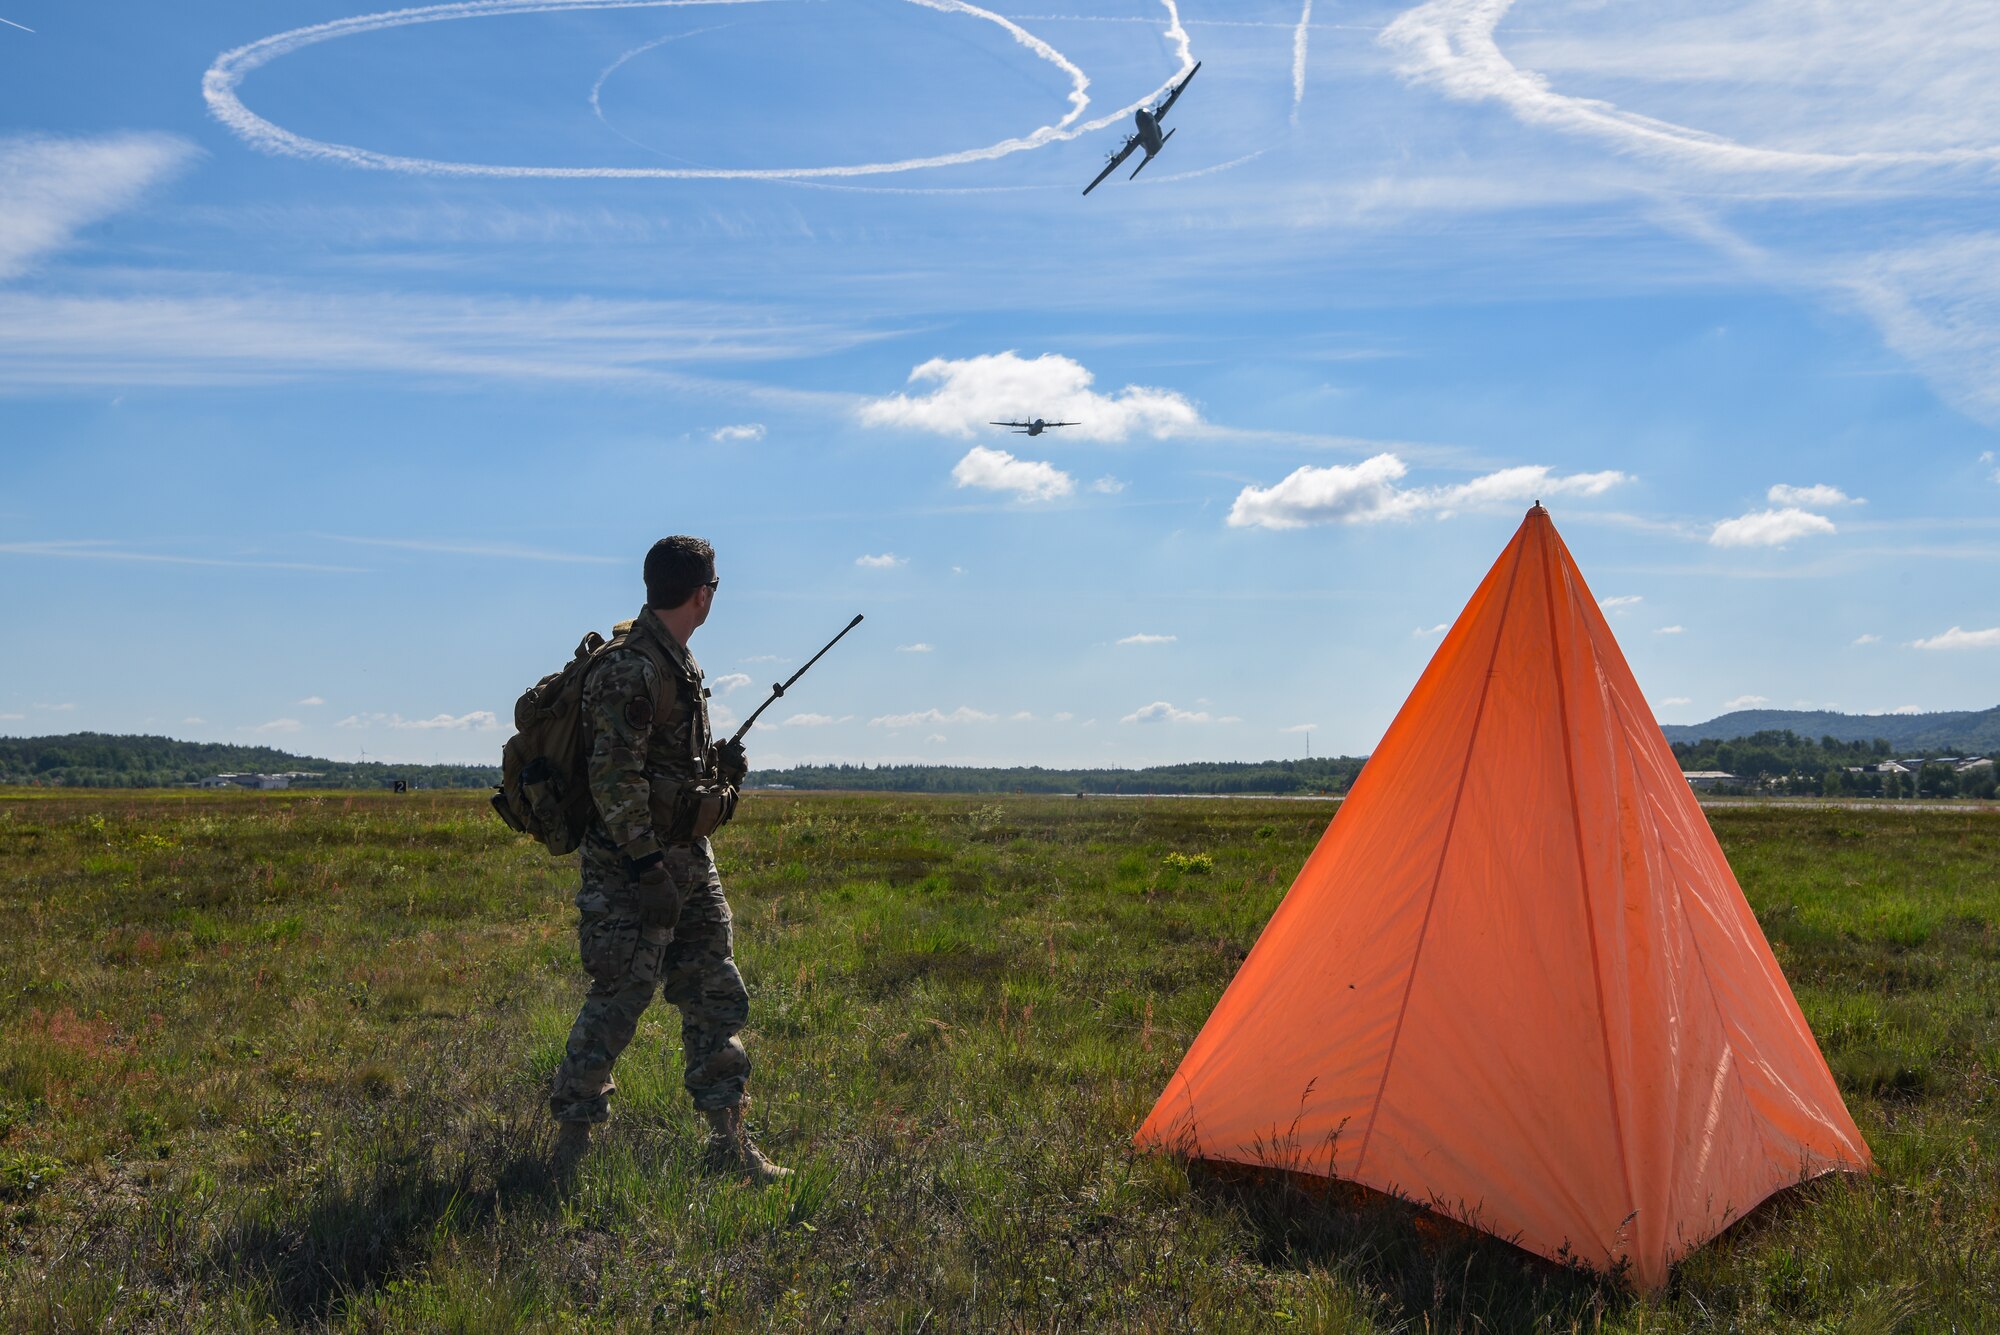 Photo of Airman setting up a drop zone for paratroopers